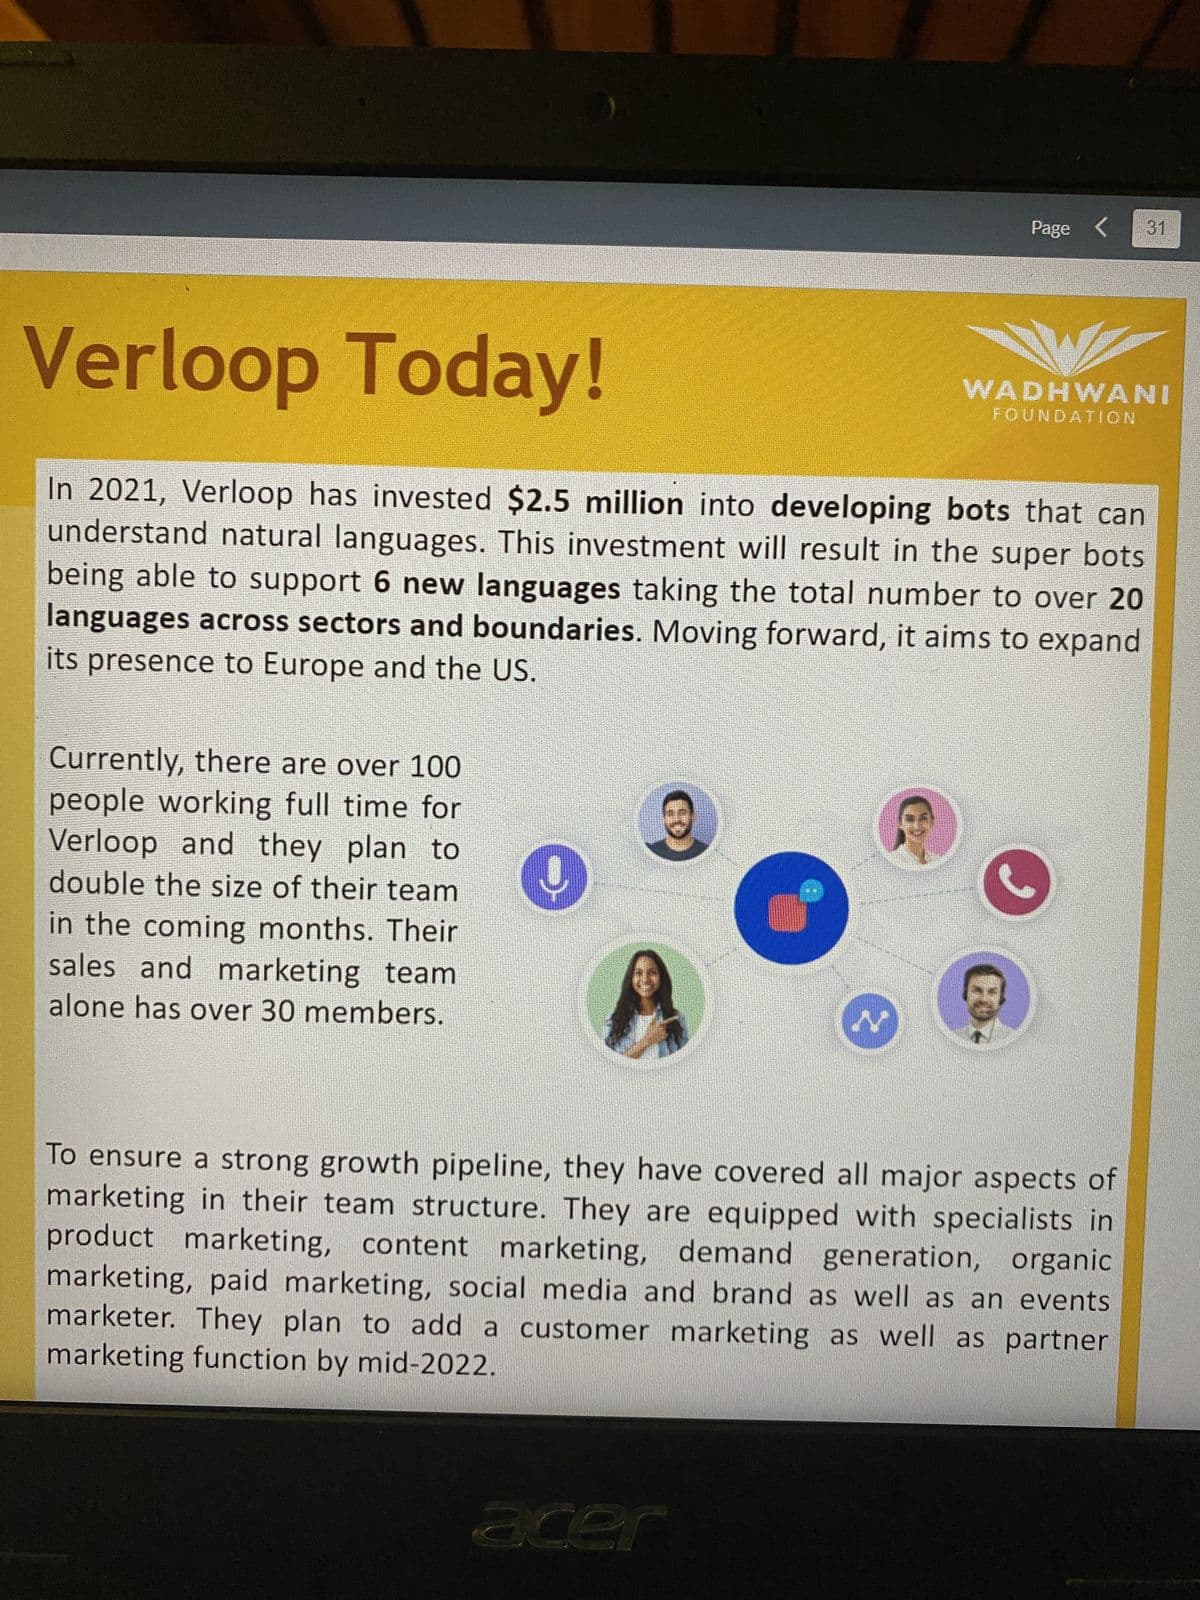 Verloop Today!
In 2021, Verloop has invested $2.5 million into developing bots that can
understand natural languages. This investment will result in the super bots
being able to support 6 new languages taking the total number to over 20
languages across sectors and boundaries. Moving forward, it aims to expand
its presence to Europe and the US.
Currently, there are over 100
people working full time for
Verloop and they plan to
double the size of their team
in the coming months. Their
sales and marketing team
alone has over 30 members.
9
acer
Page < 31
WADHWANI
FOUNDATION
Fo
To ensure a strong growth pipeline, they have covered all major aspects of
marketing in their team structure. They are equipped with specialists in
product marketing, content marketing, demand generation, organic
marketing, paid marketing, social media and brand as well as an events
marketer. They plan to add a customer marketing as well as partner
marketing function by mid-2022.